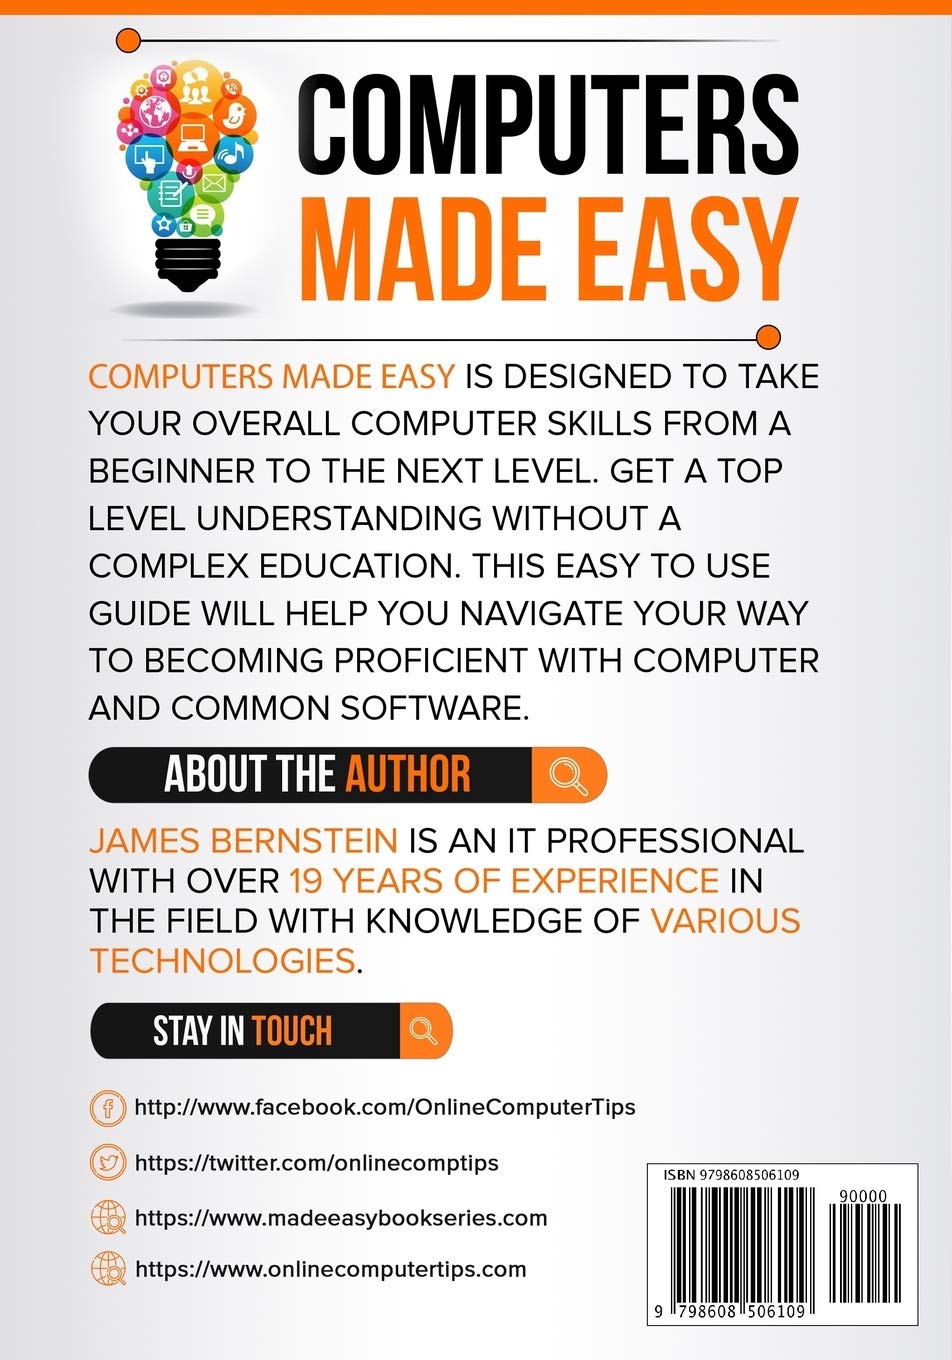 Computers Made Easy: From Dummy To Geek